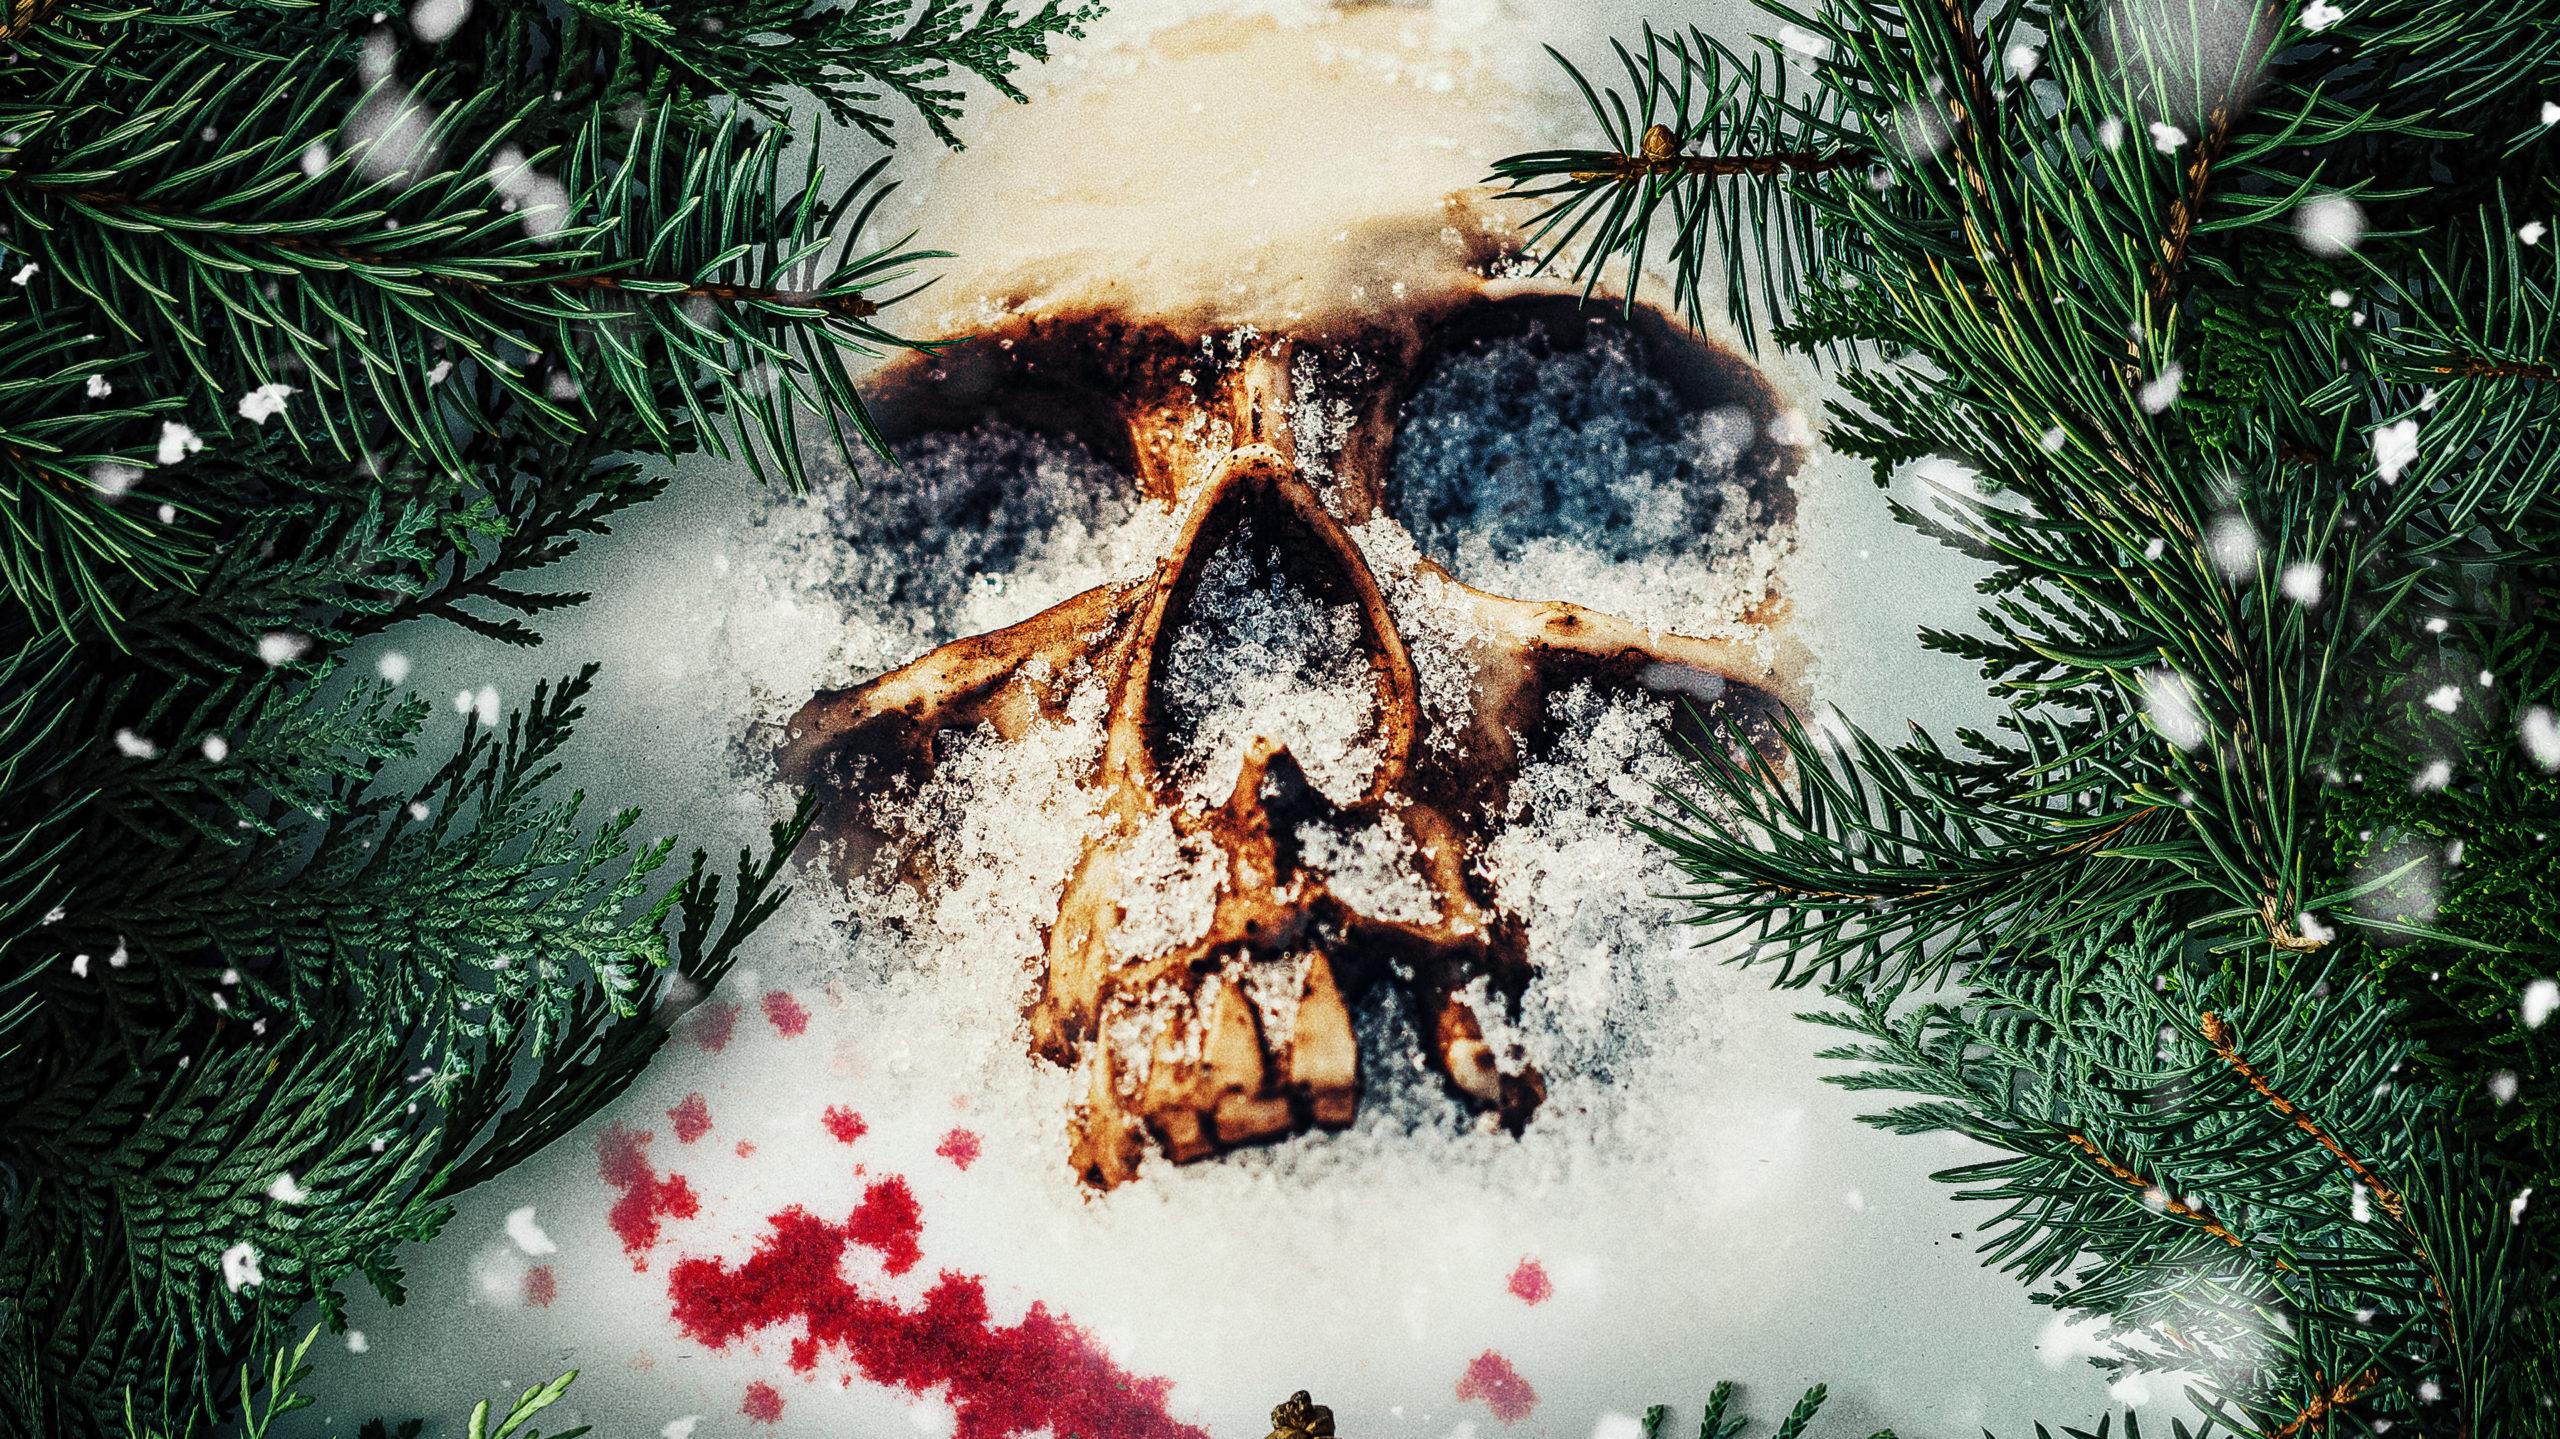 The Killing Tree Trailer Holiday Horror Movie Unleashes A